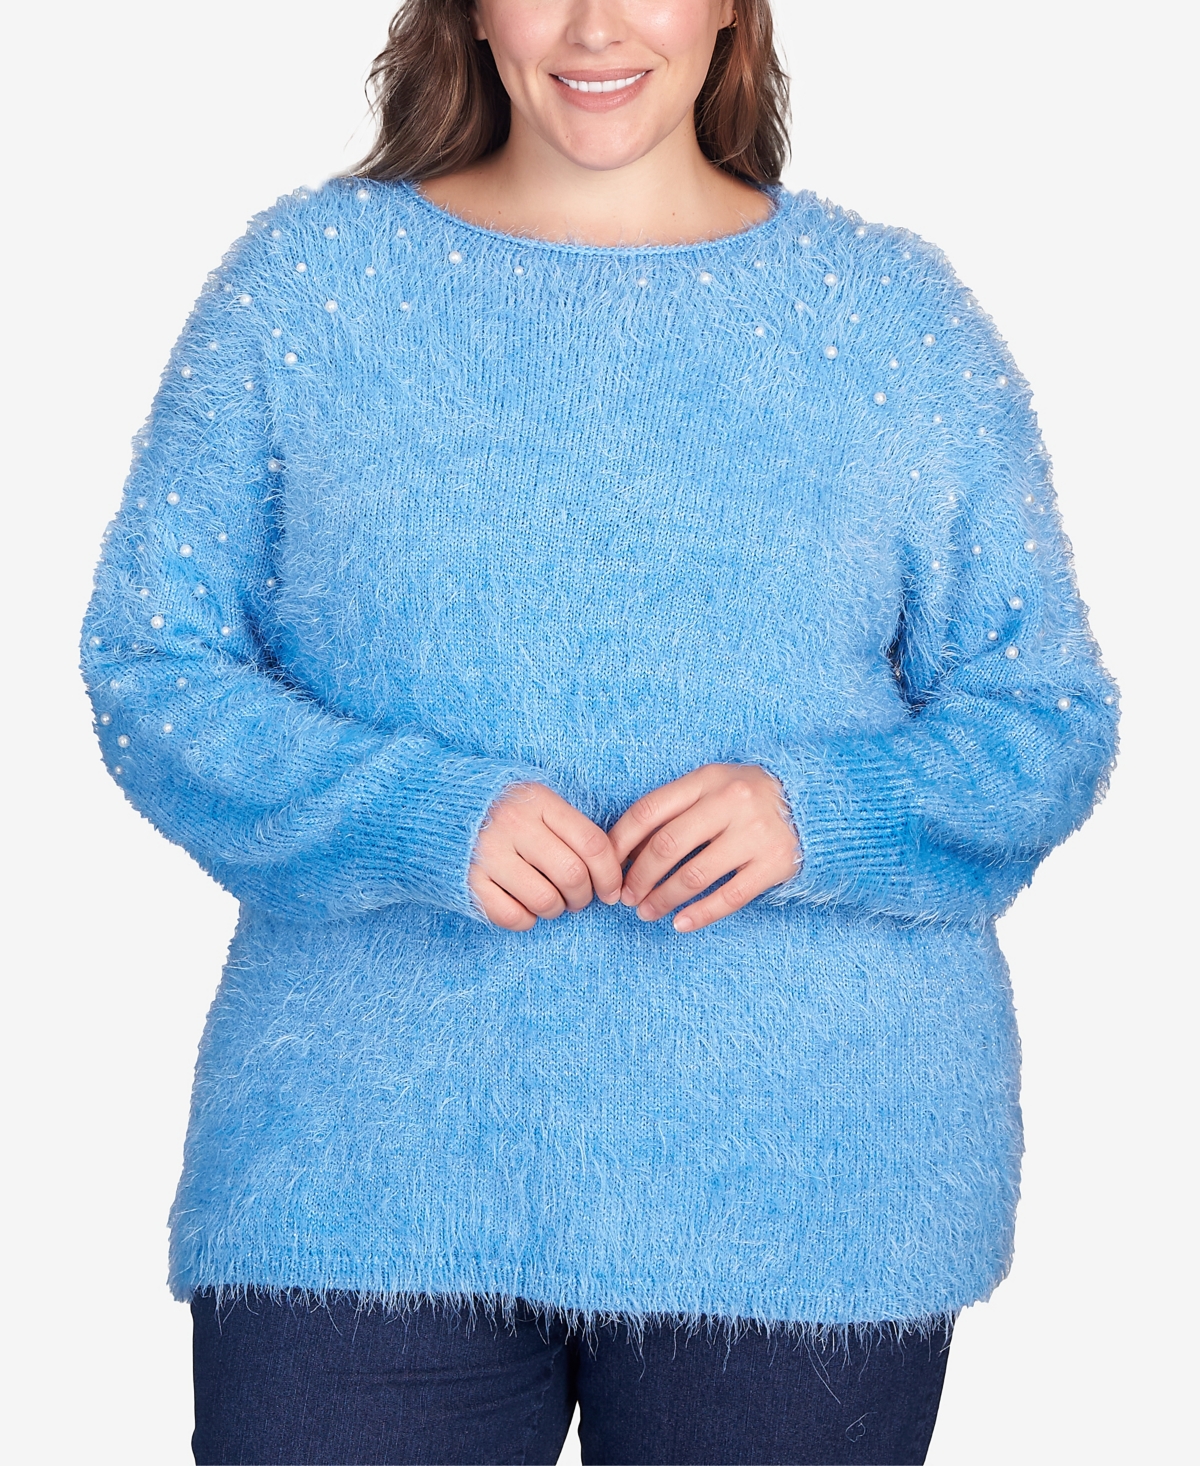 Ruby Rd. Plus Size Imitation Pearl Studded Metallic Eyelash Sweater In French Blue